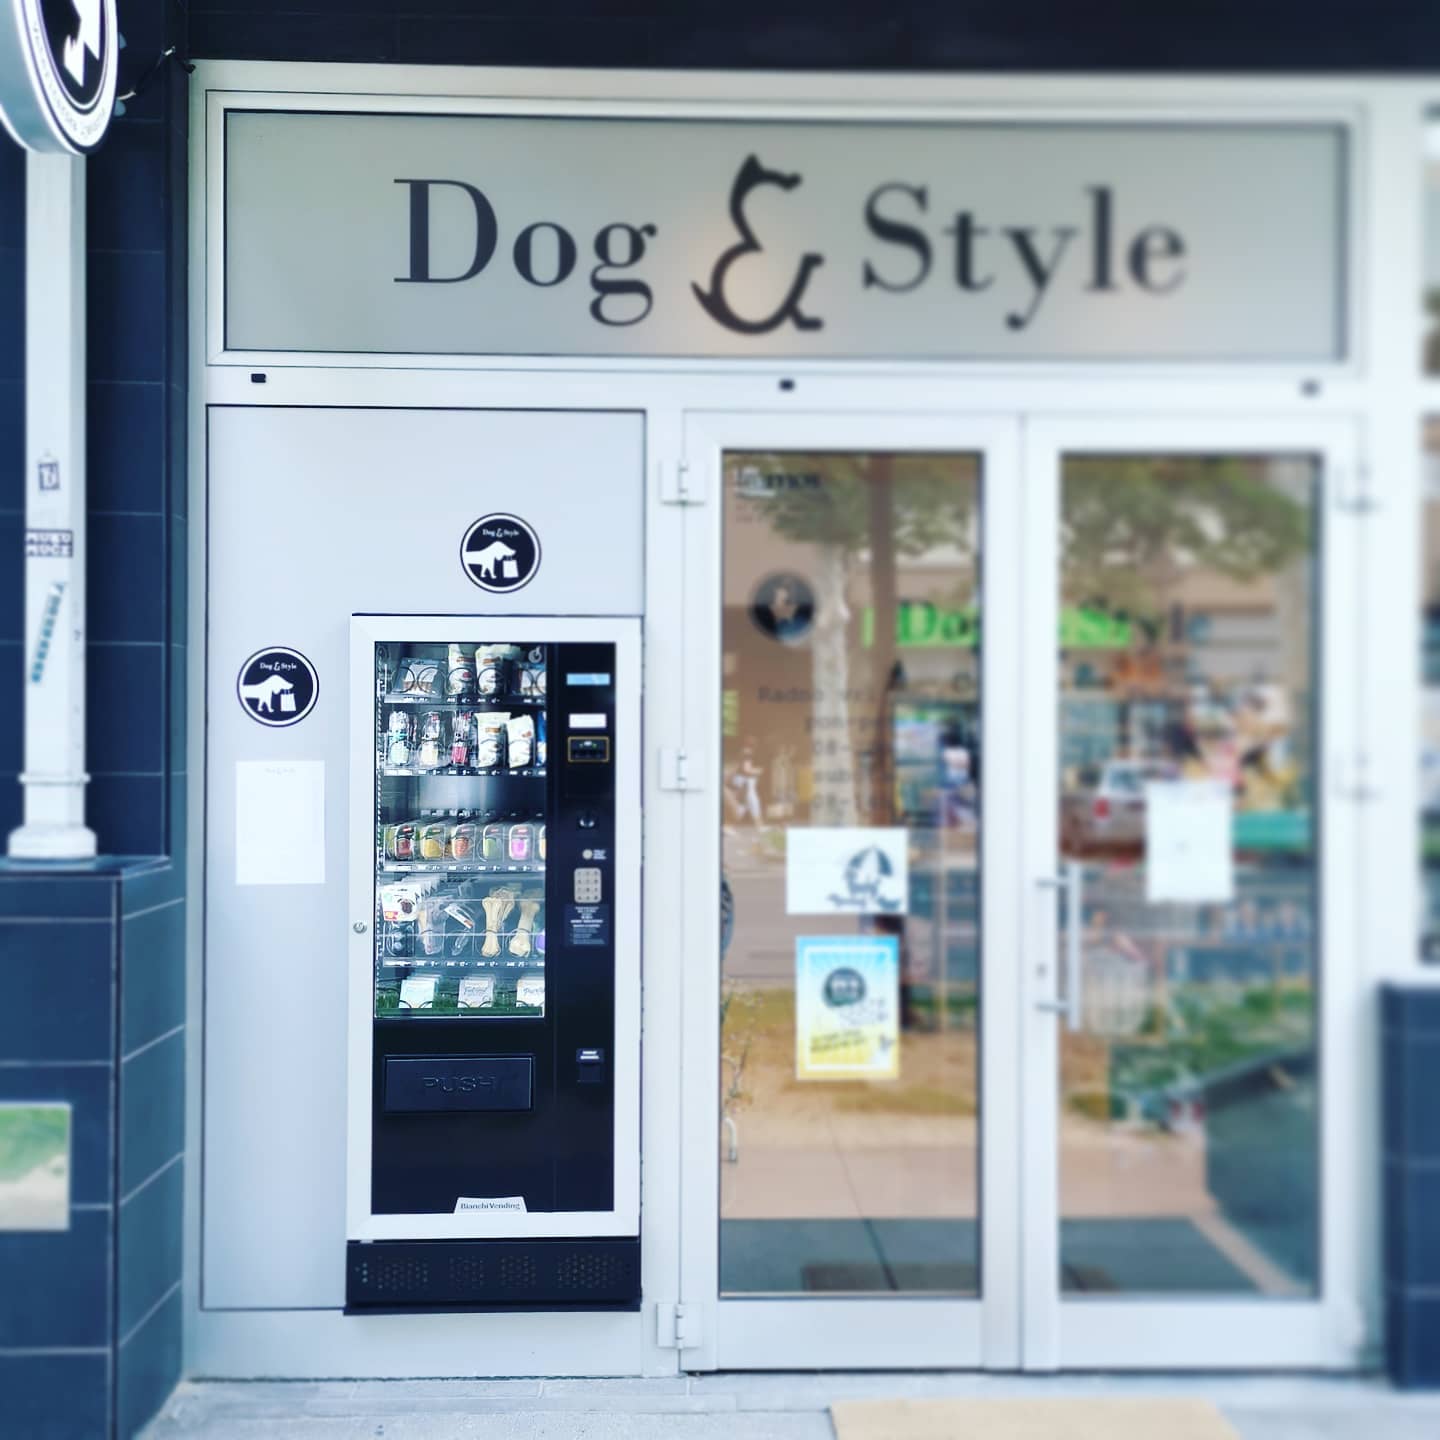 First vending machine for pets in Croatia Dog & Style